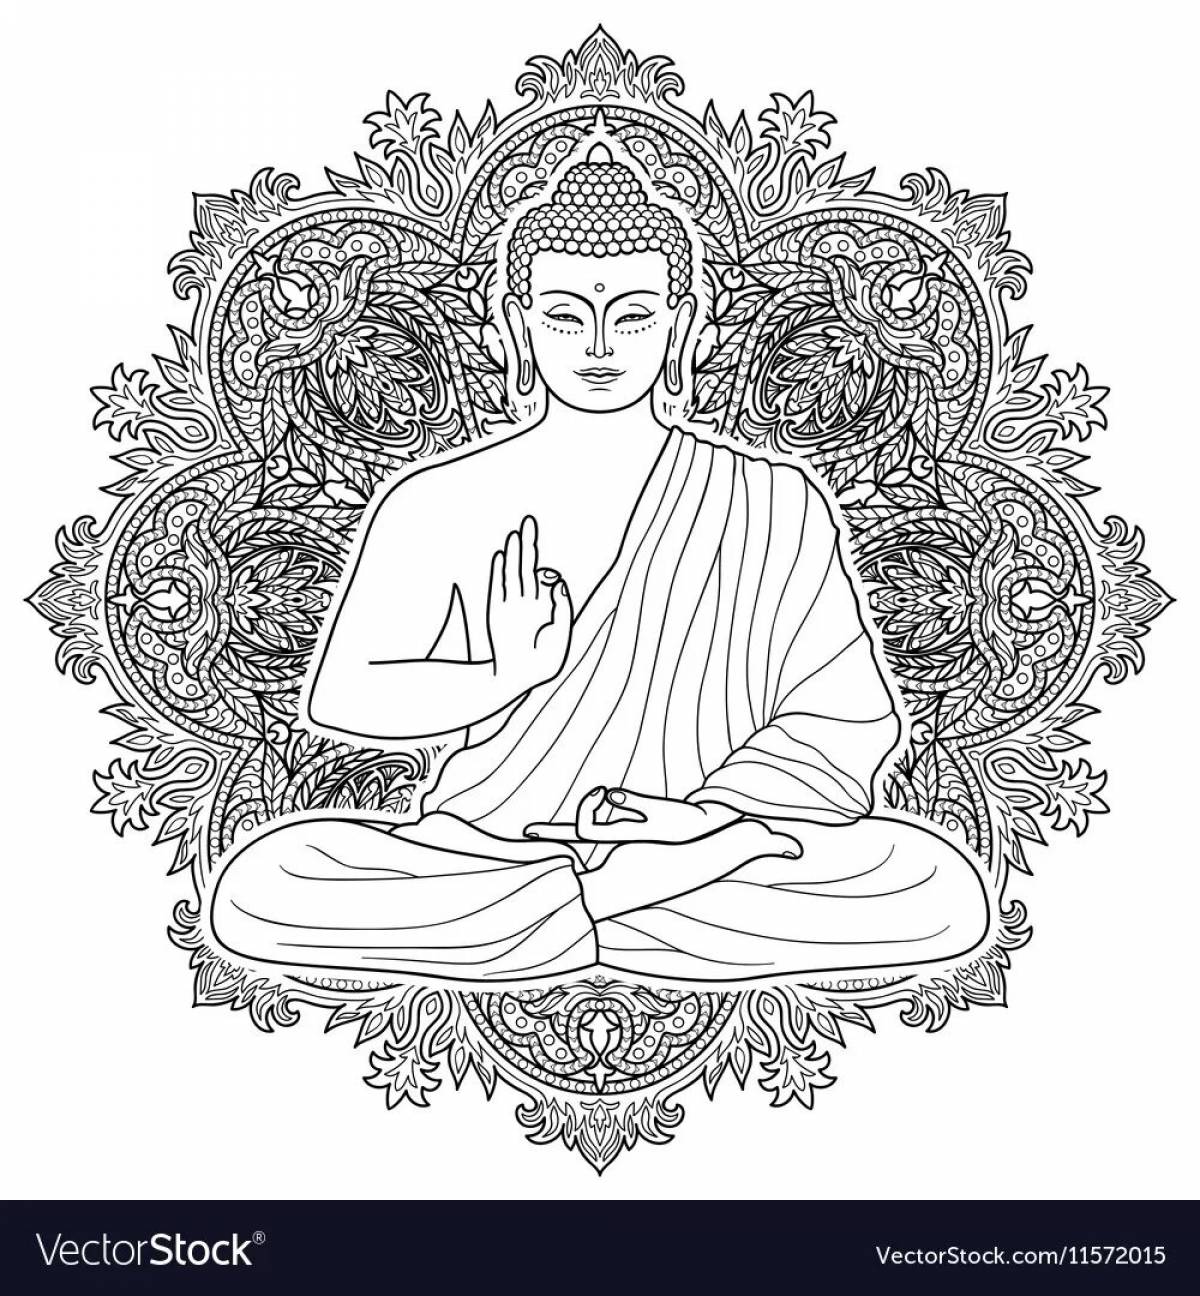 Awesome buddhism coloring page